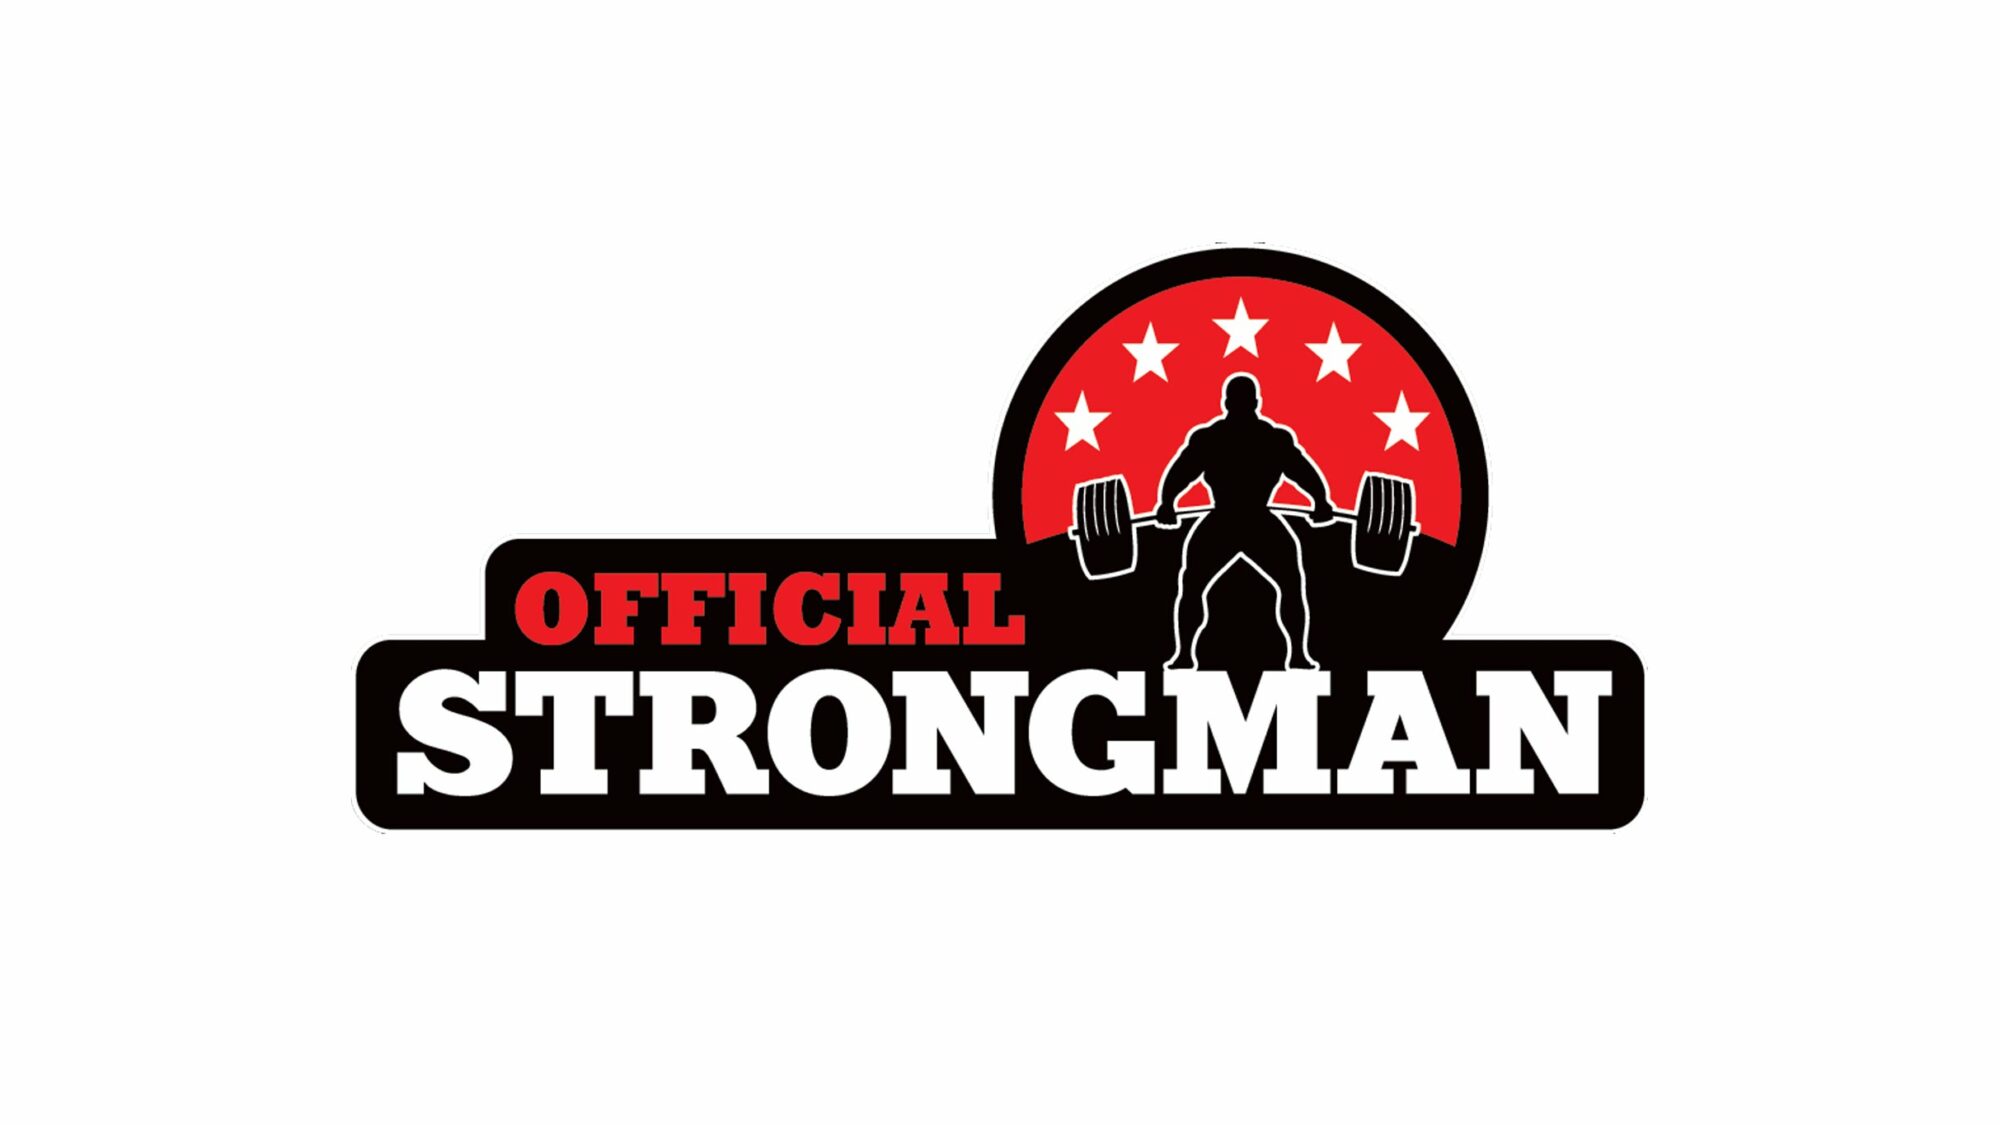 Image name Official Strongman European Championships Weekend Ticket at York Barbican York the 1 image from the post Official Strongman European Championships Weekend Ticket at York Barbican, York in Yorkshire.com.